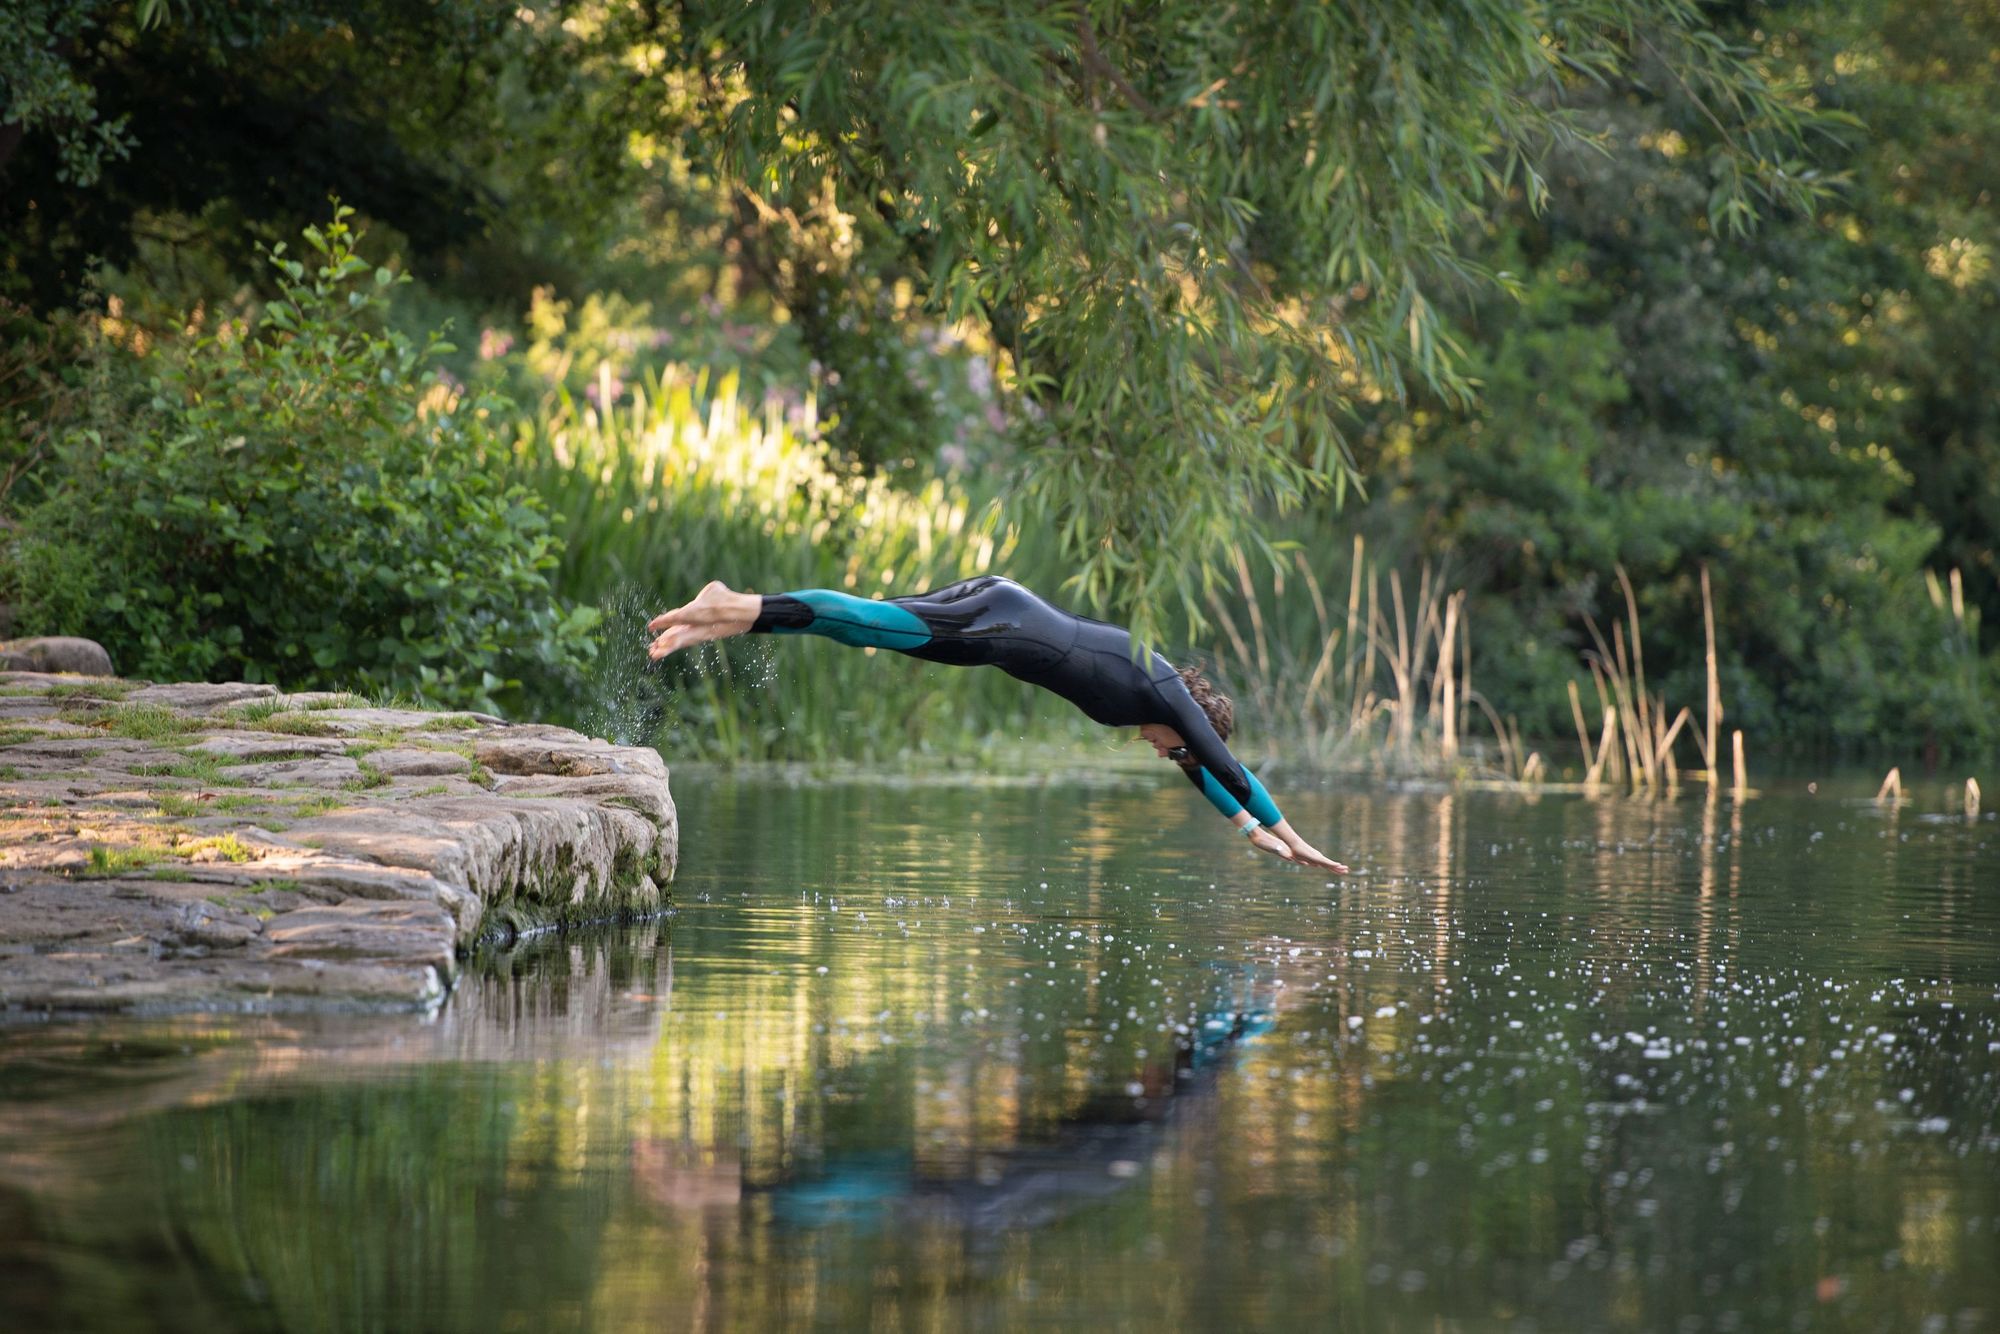 A woman in a wetsuit dives into a river.